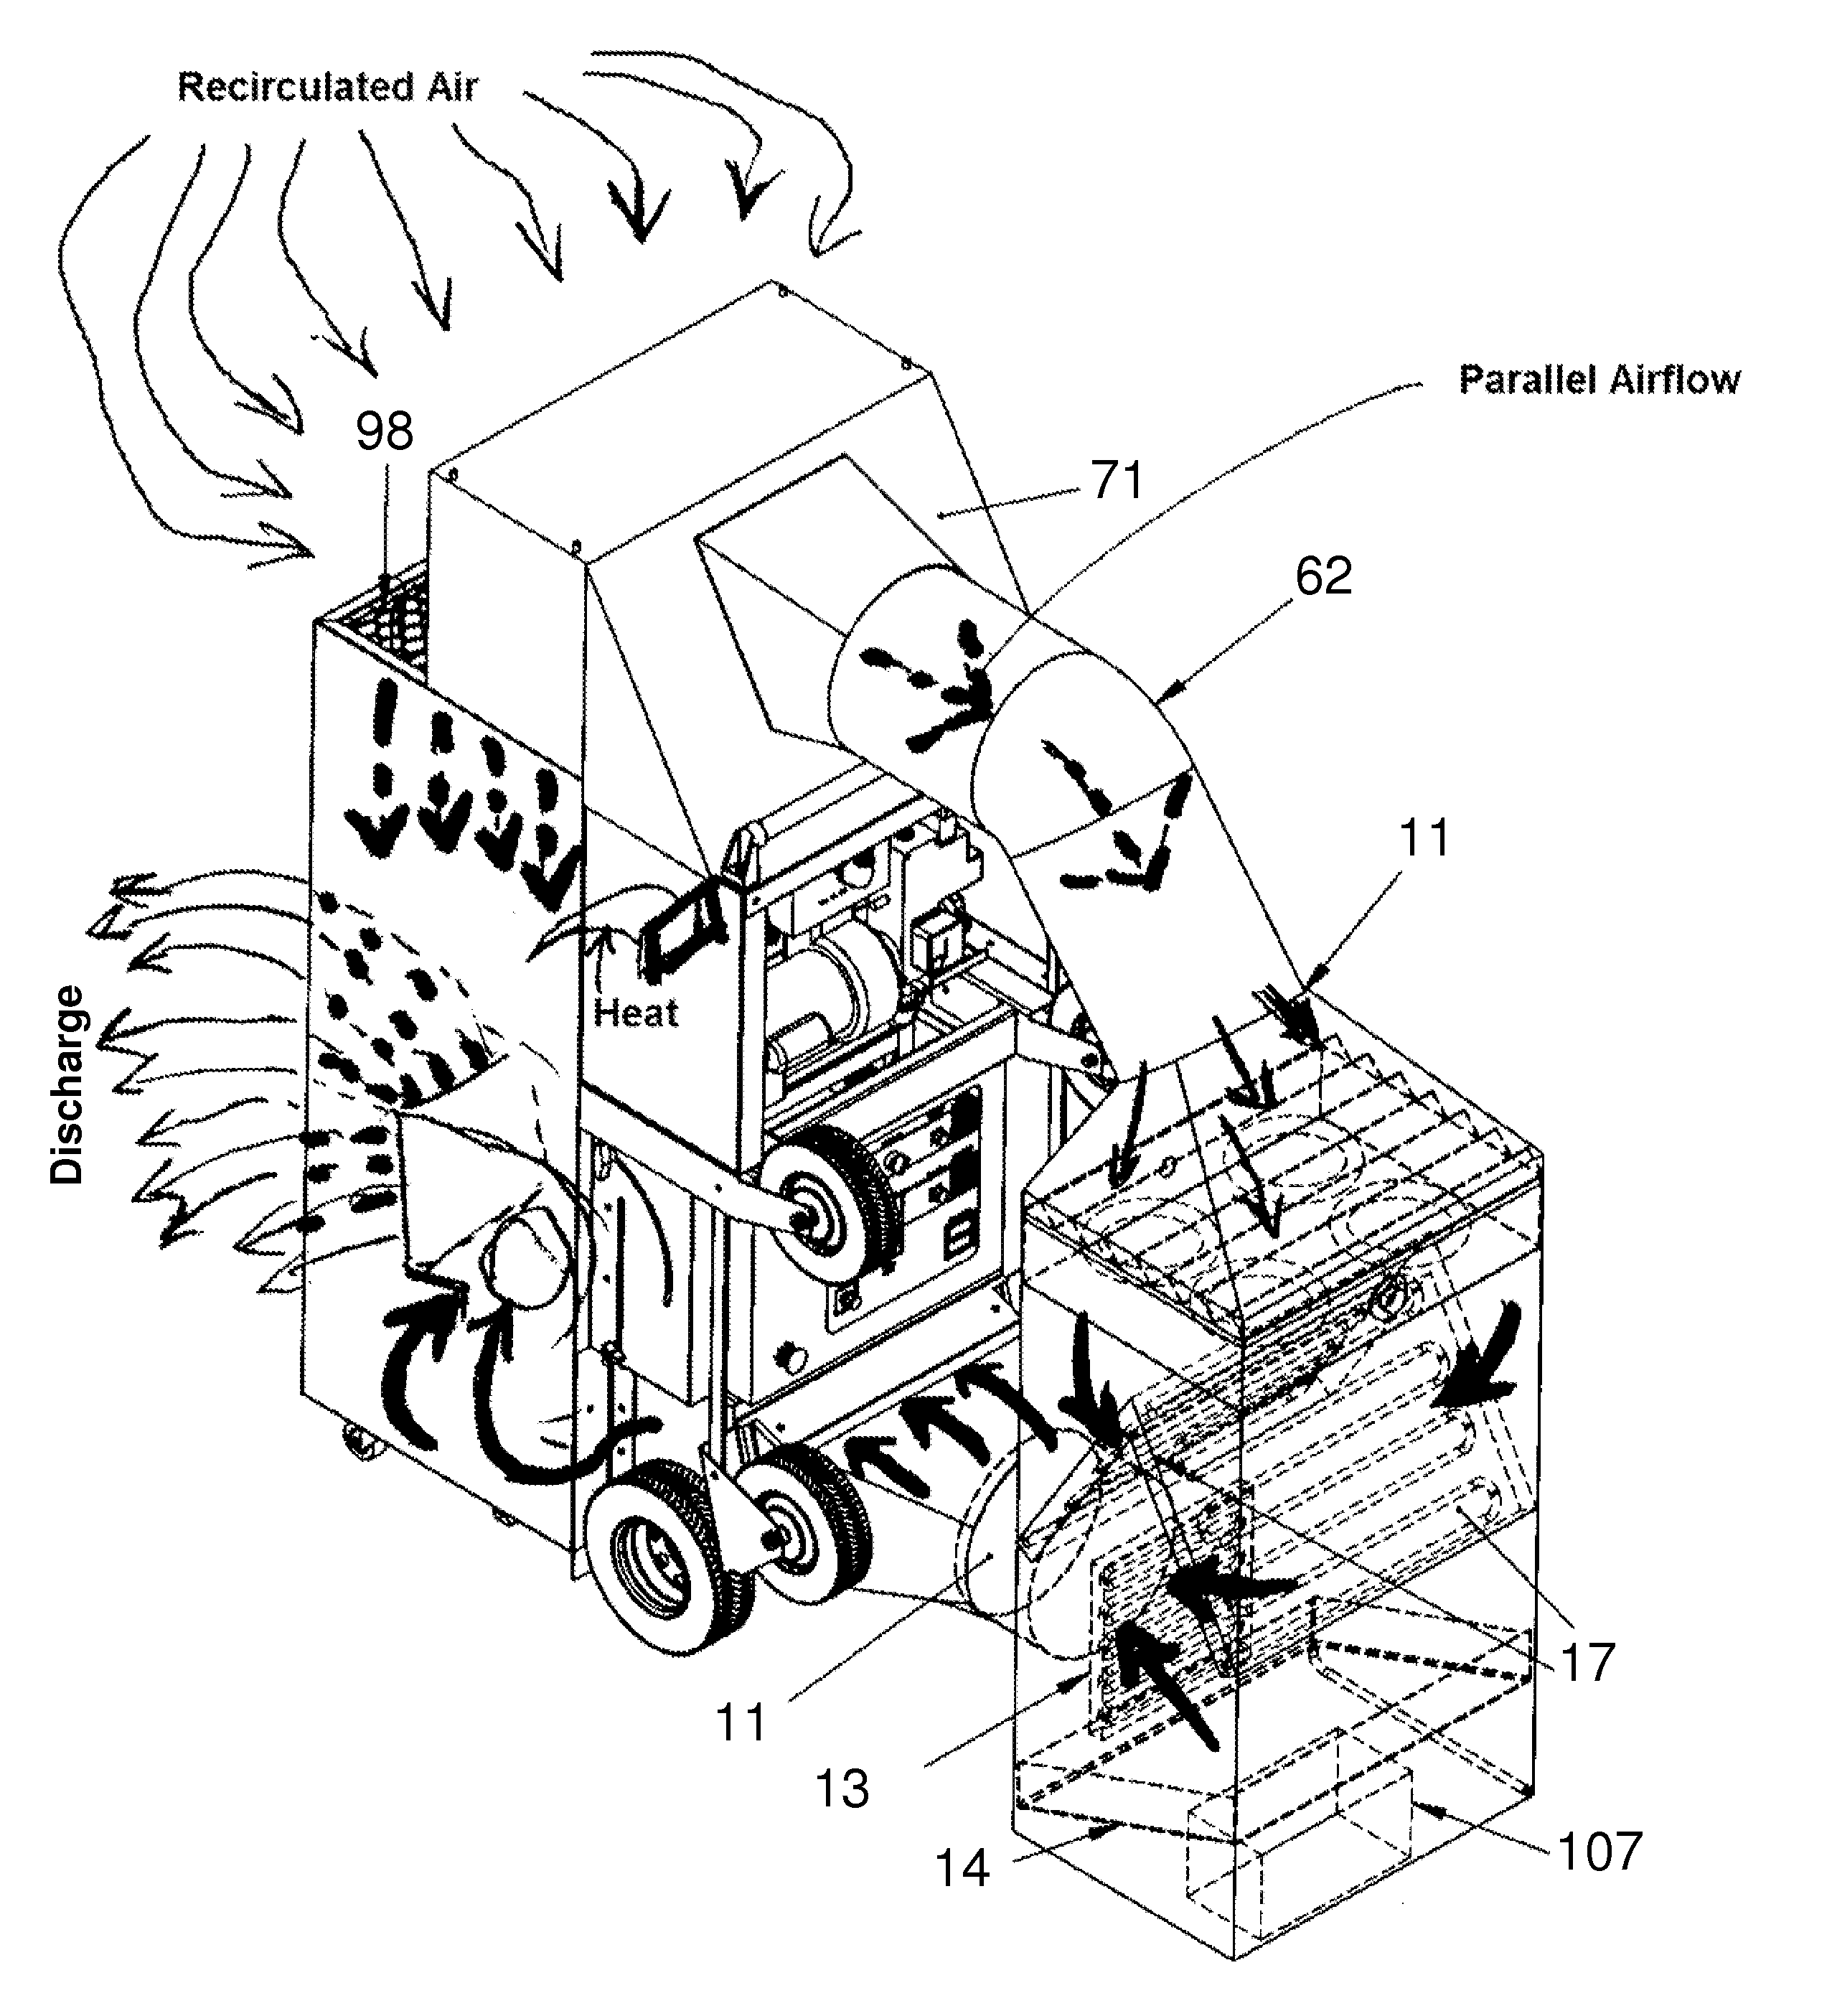 Multi-Component System for Treating Enclosed Environments